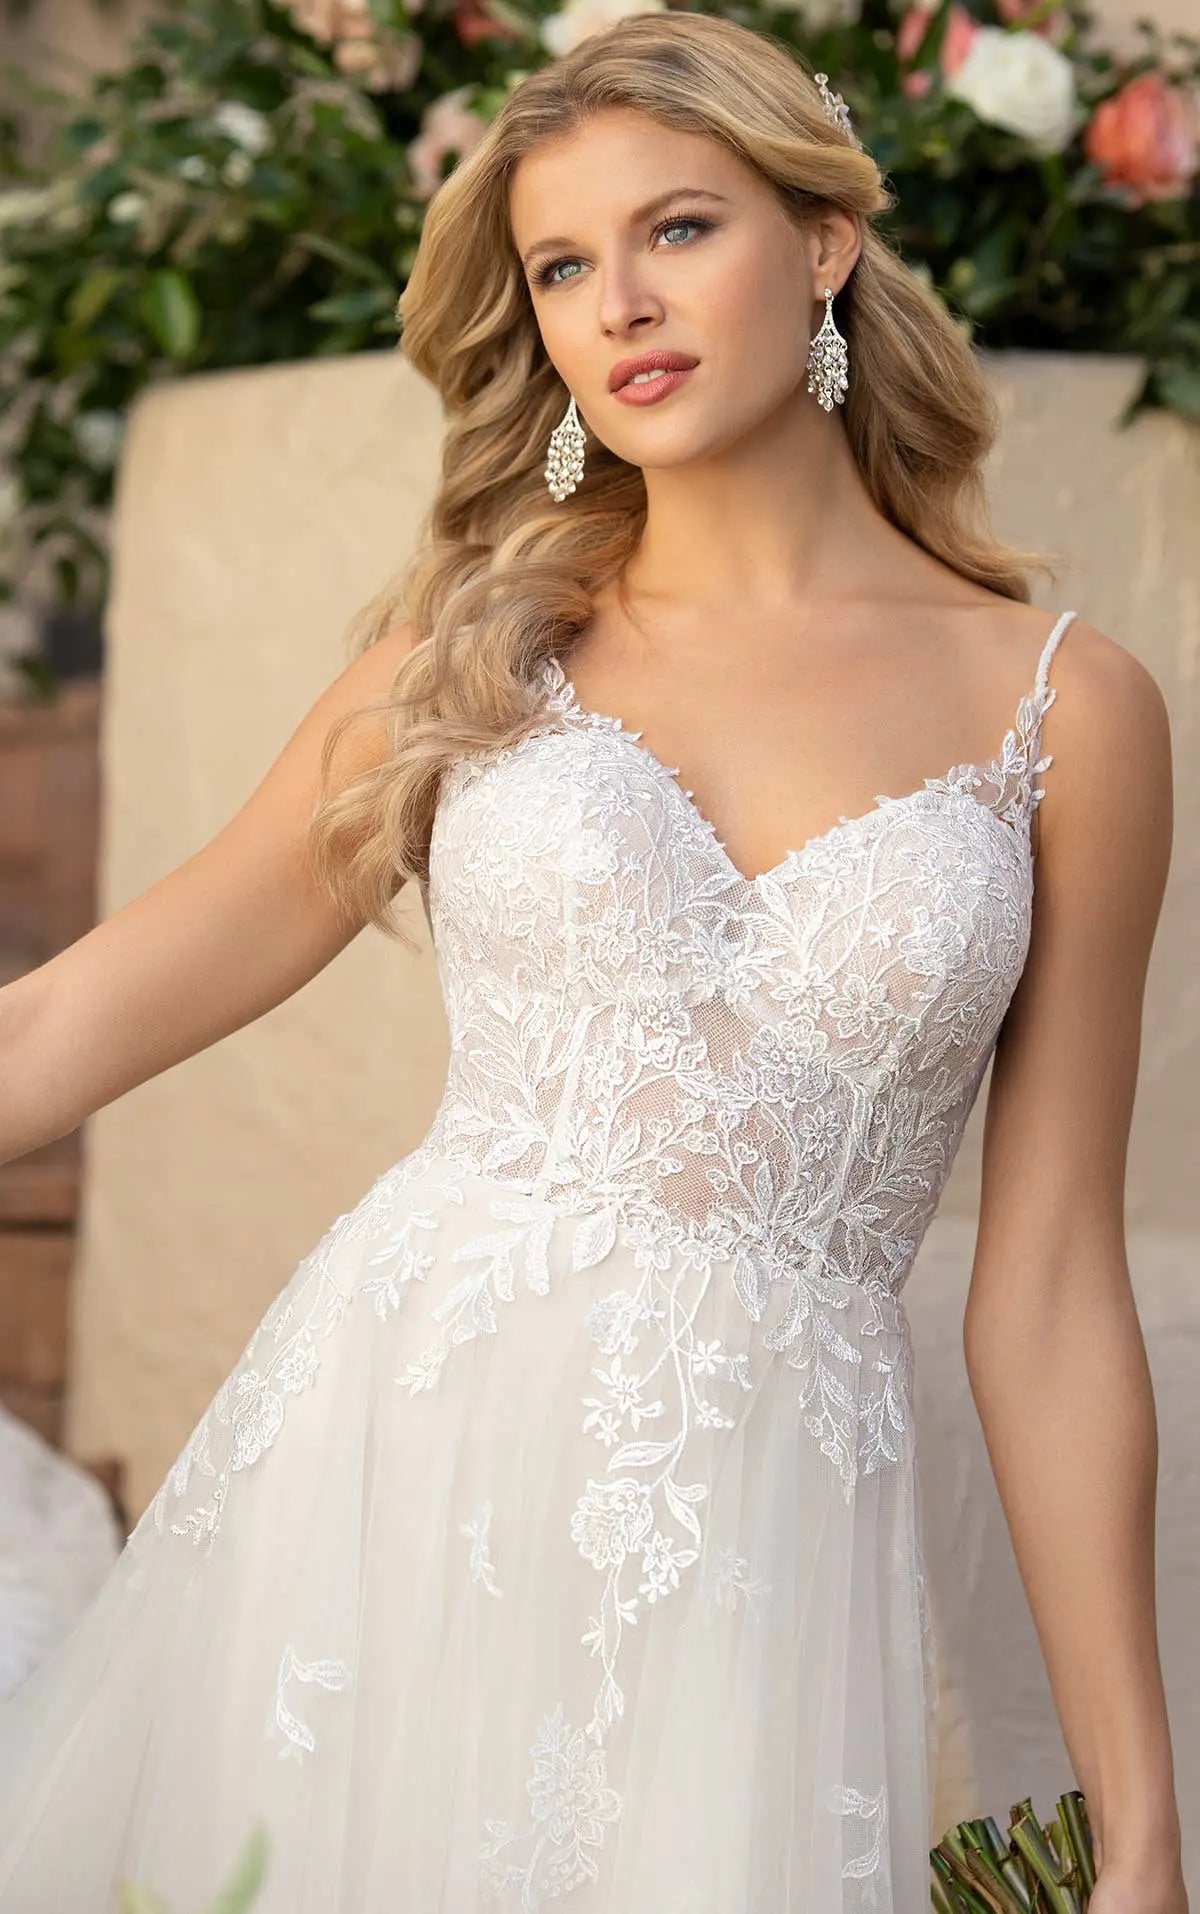 7083 - Whimsical Wedding Dress with French Lace